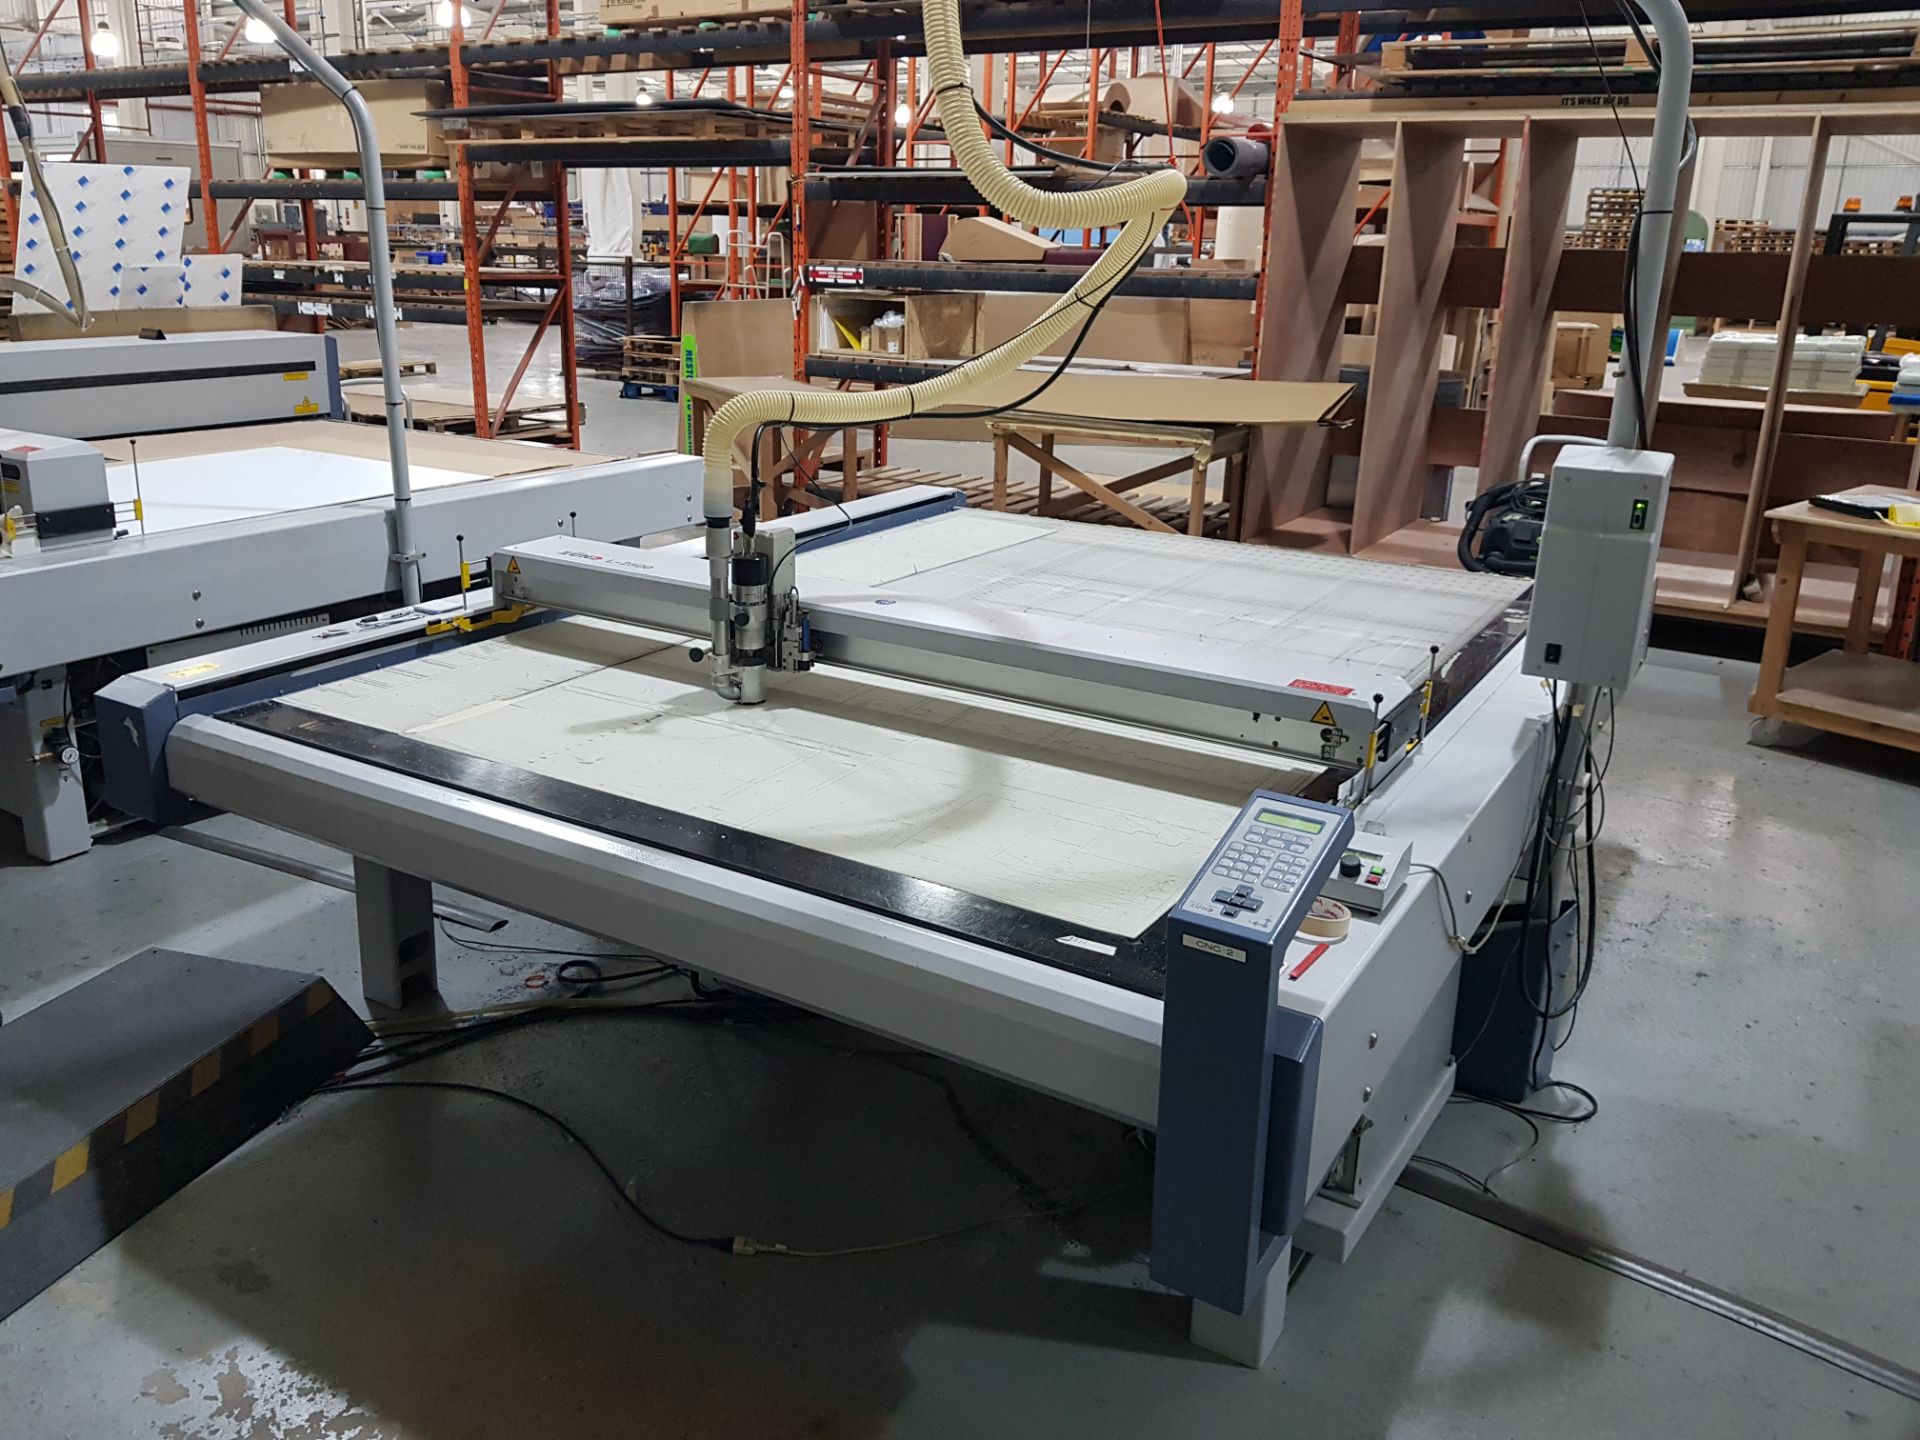 ZUND L 2500 GEN 2 FLATBED CNC ROUTER (LO25446) 1KW ROUTER HEAD (2006) (ASSETS LOCATED IN DENTON,